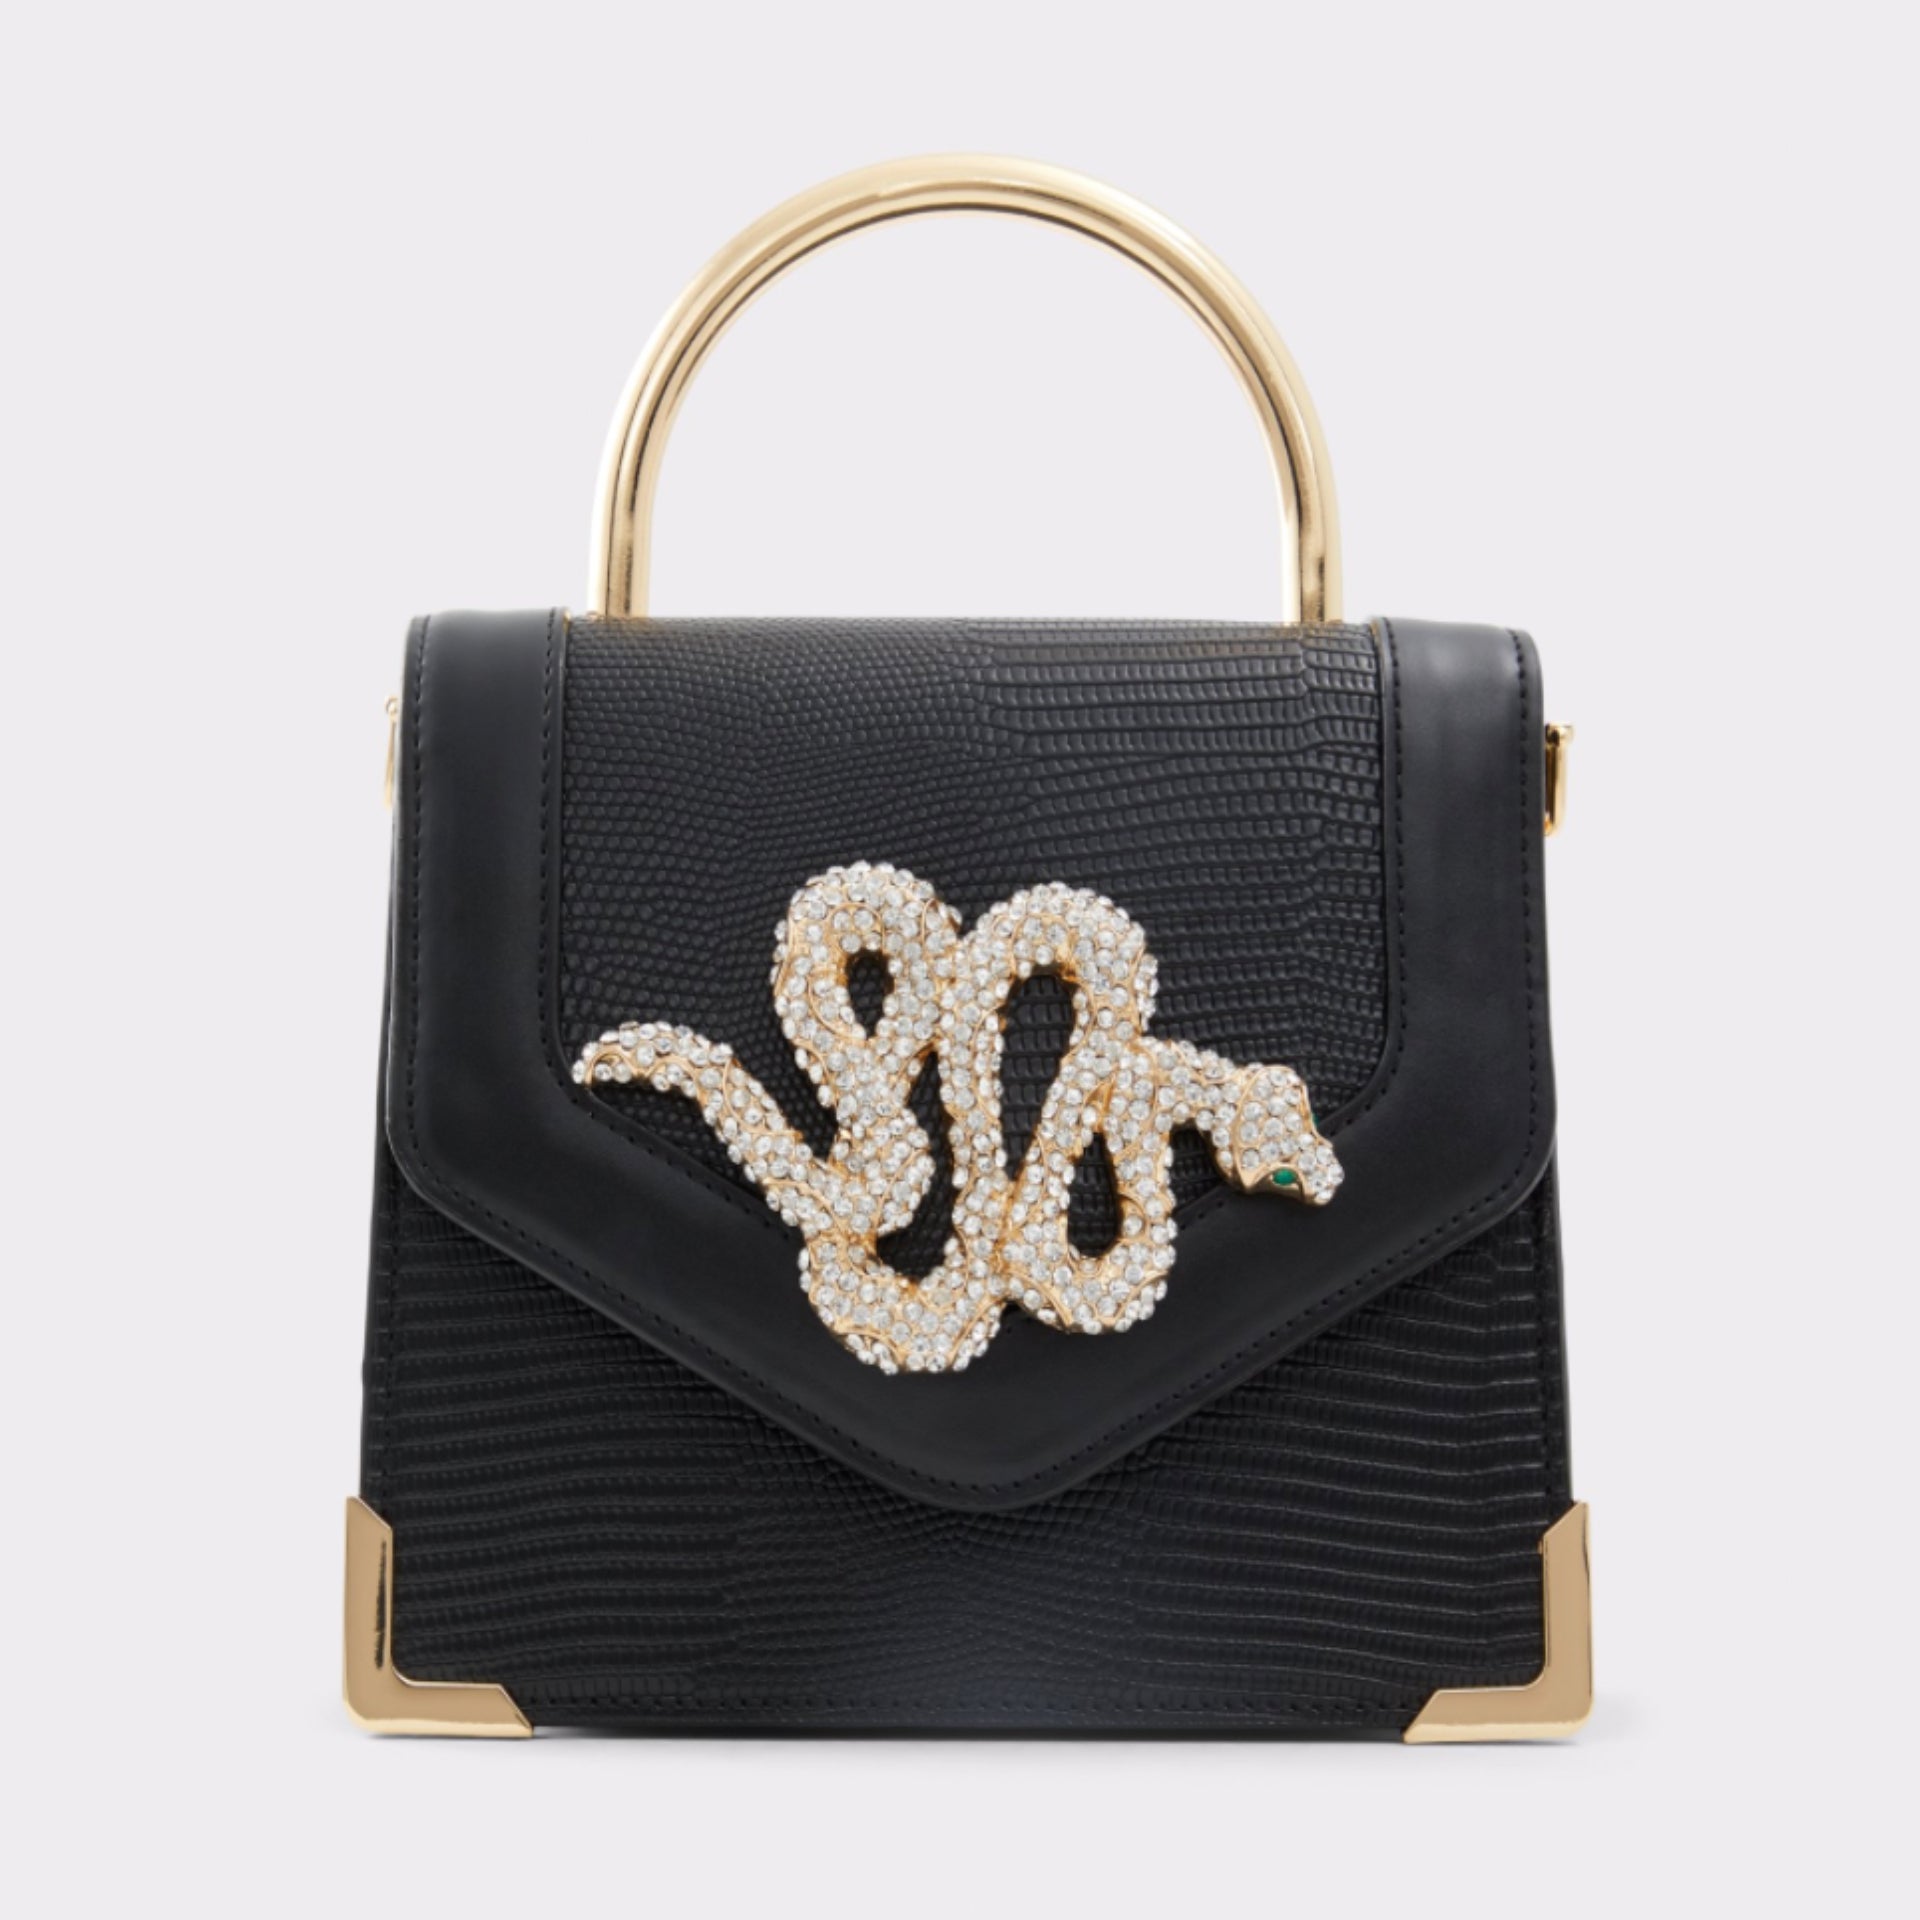 20 Handbags You Can't Do New Year's Eve Without | Essence